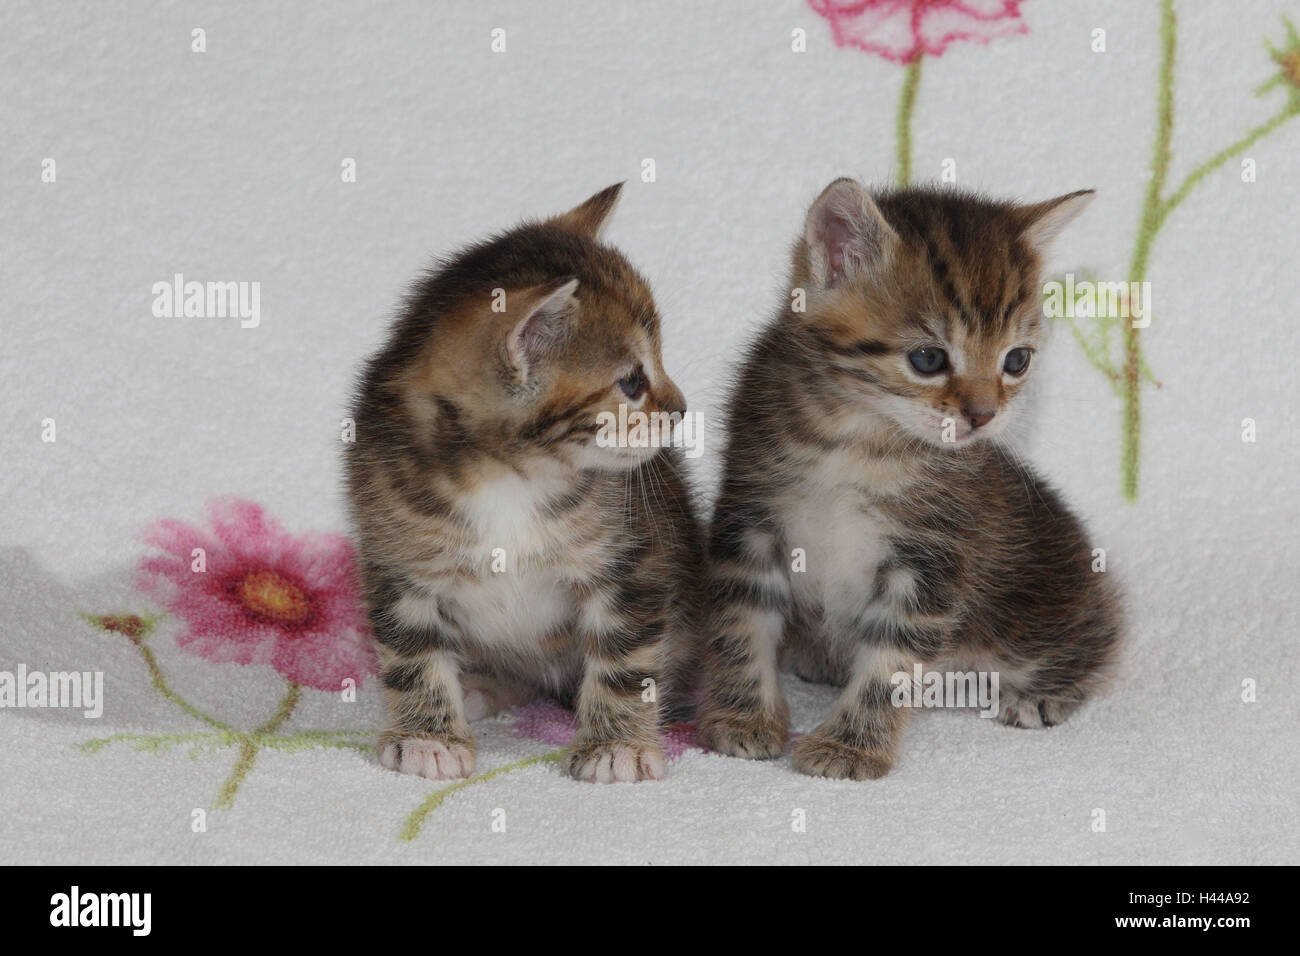 Cats, young, sit, together, bed, animals, mammals, pets, small cats, Felidae, domesticates, house cat, young animal, kitten, two, siblings, small, awkward, clumsy, sweetly, side by side, striped, cohesion, love, suture, togetherness, young animals, animal babies, inside, Stock Photo